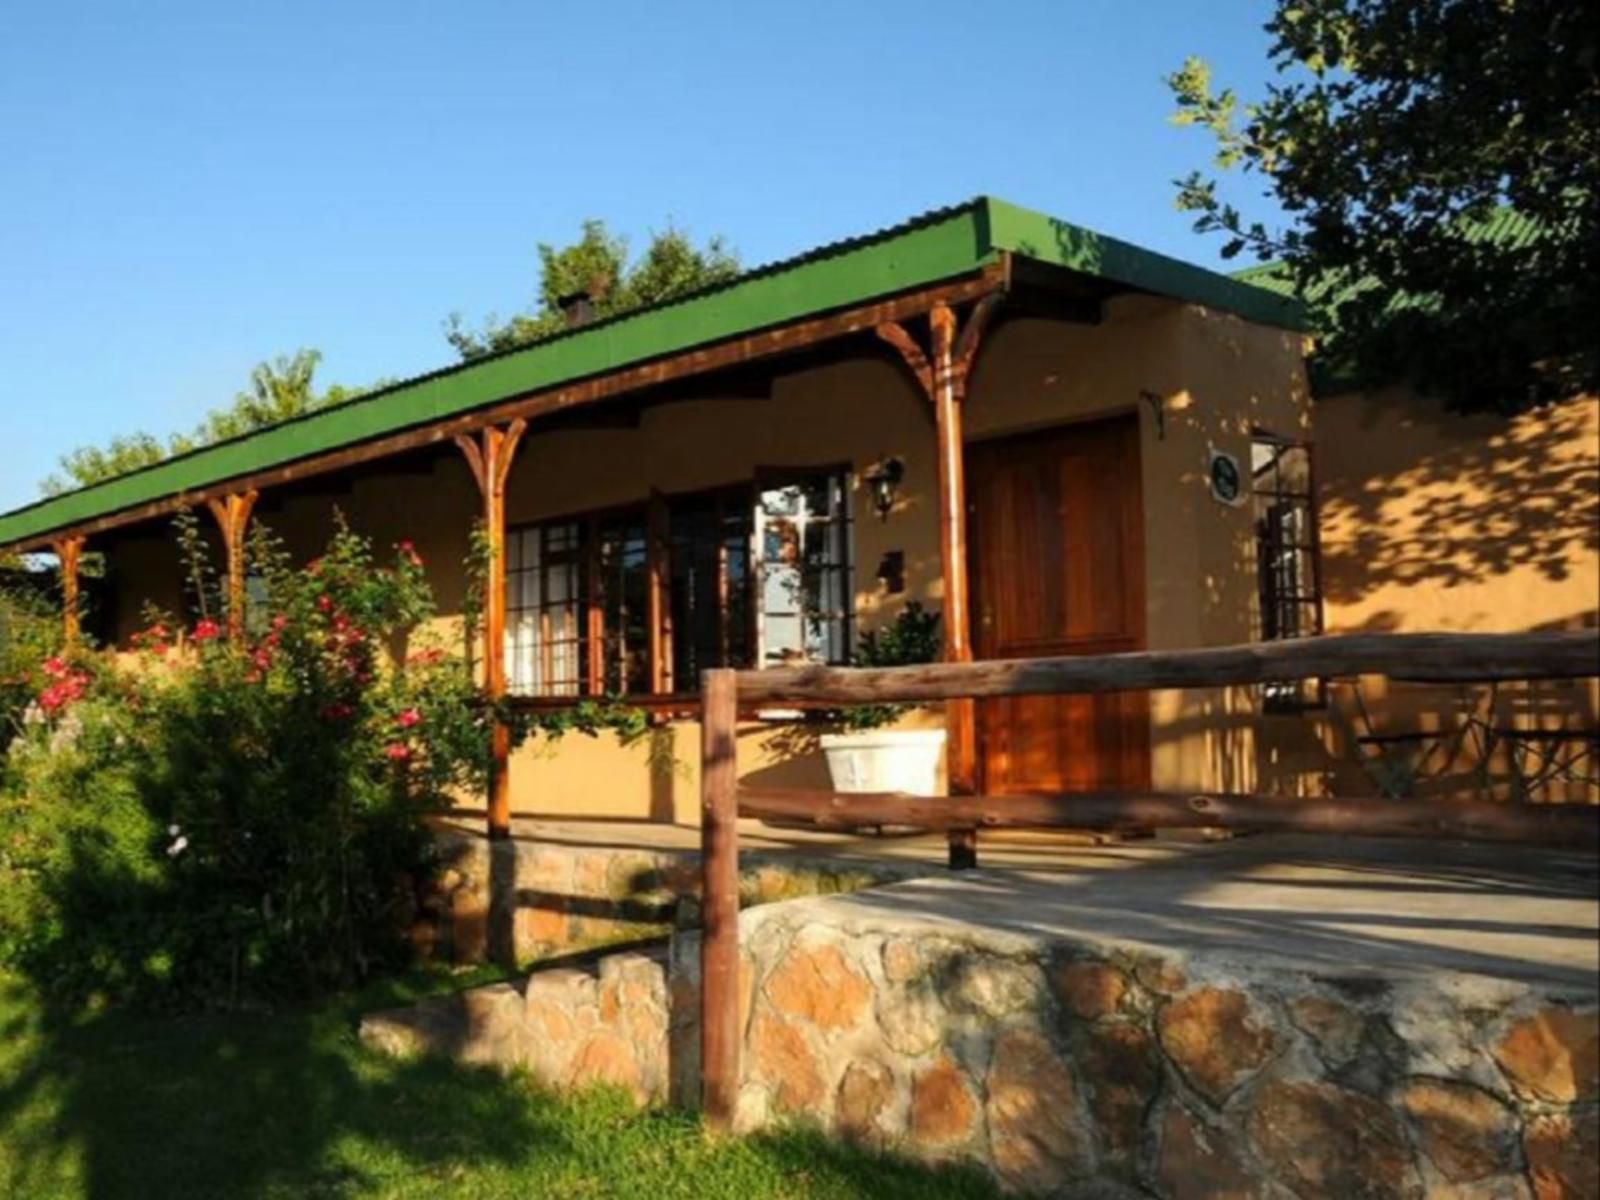 Schaefers Halt Dullstroom Mpumalanga South Africa Complementary Colors, Cabin, Building, Architecture, House